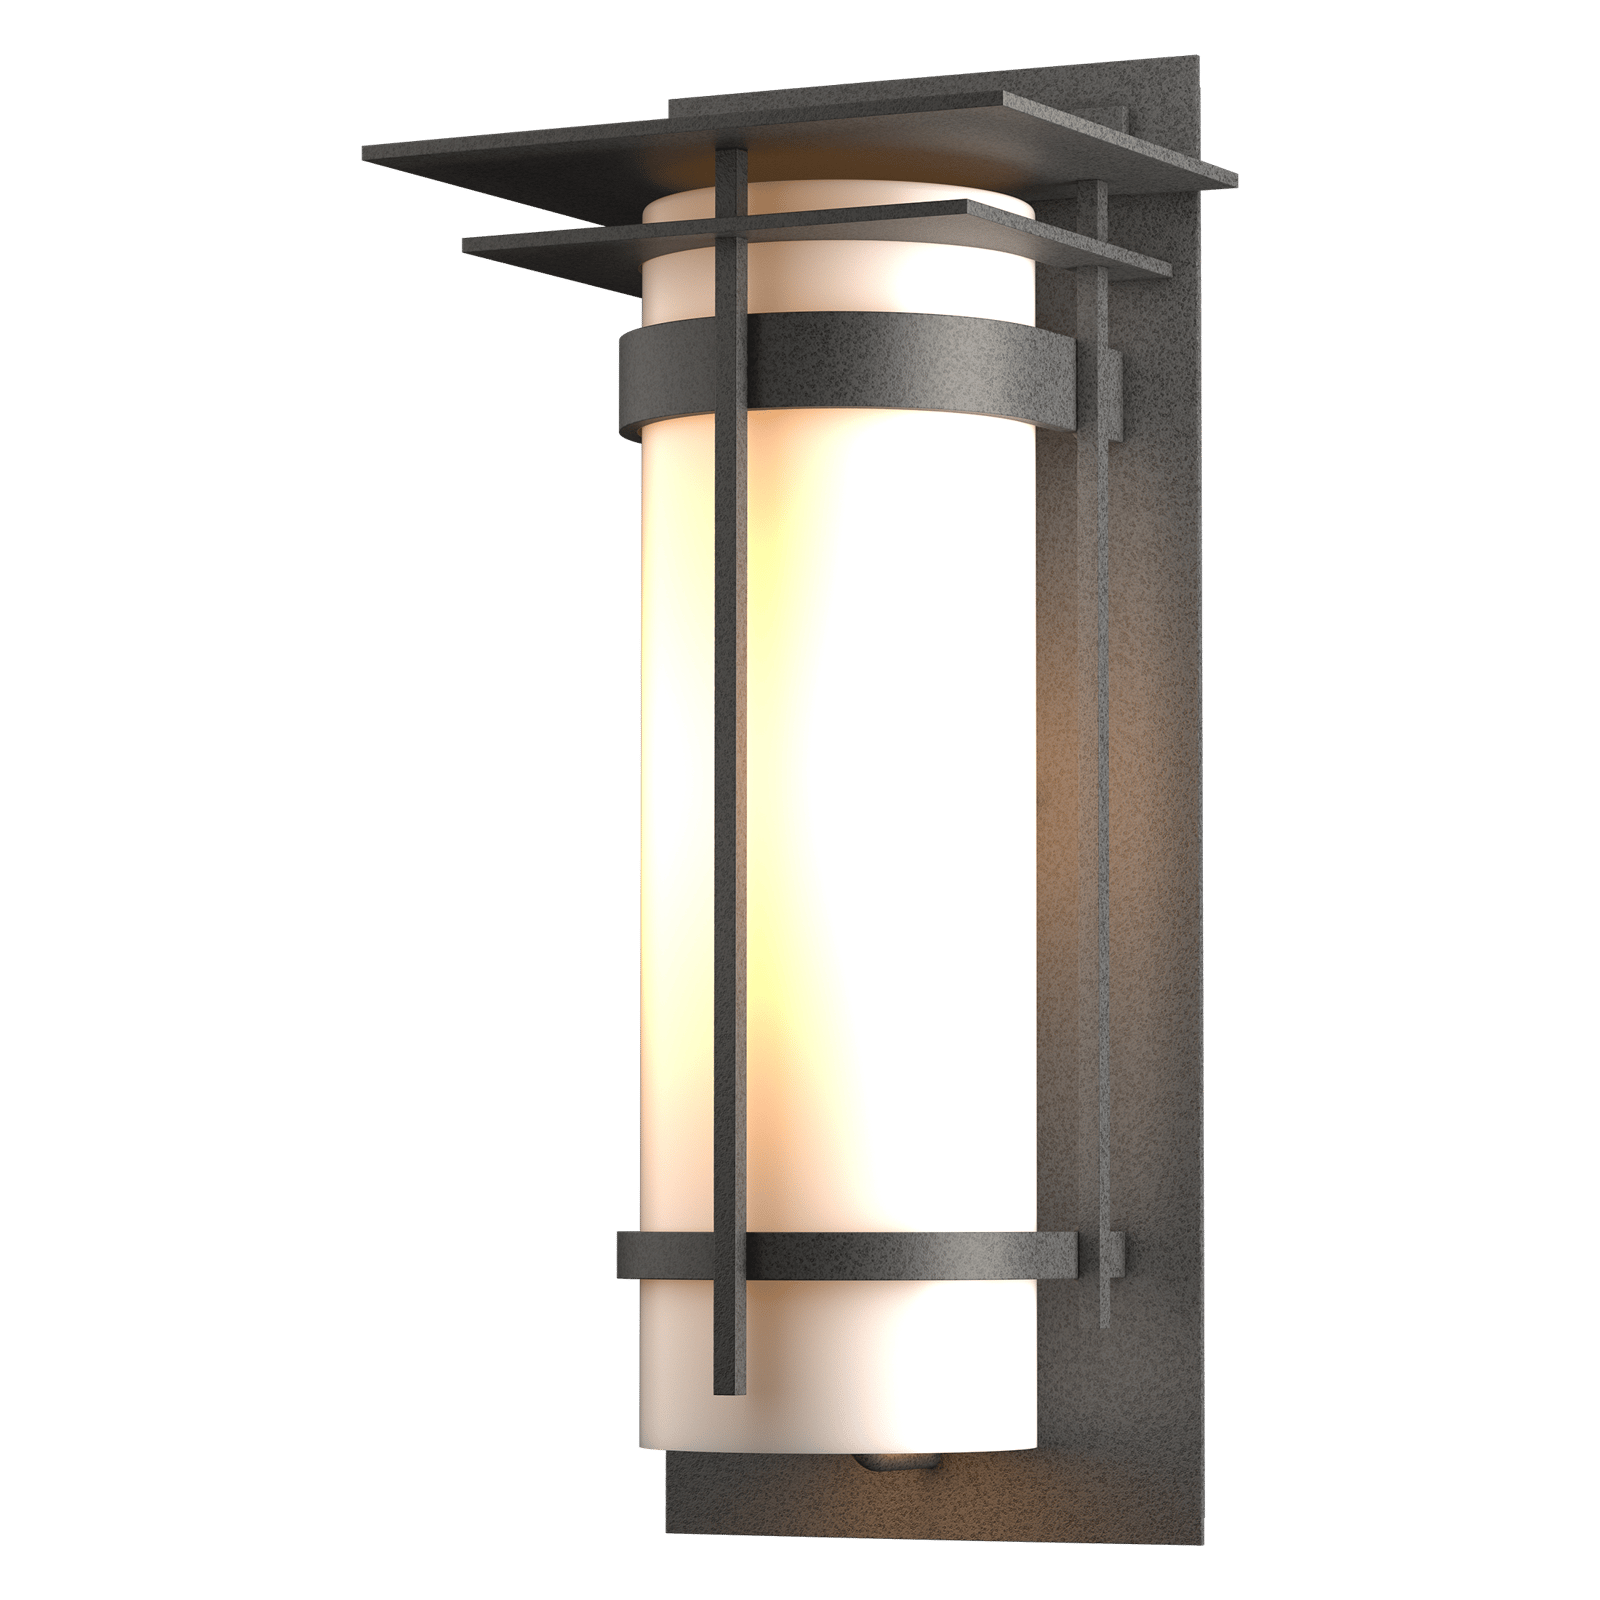 Hubbardton Forge Banded with Top Plate Large Outdoor Sconce Outdoor l Wall Hubbardton Forge Coastal Natural Iron  